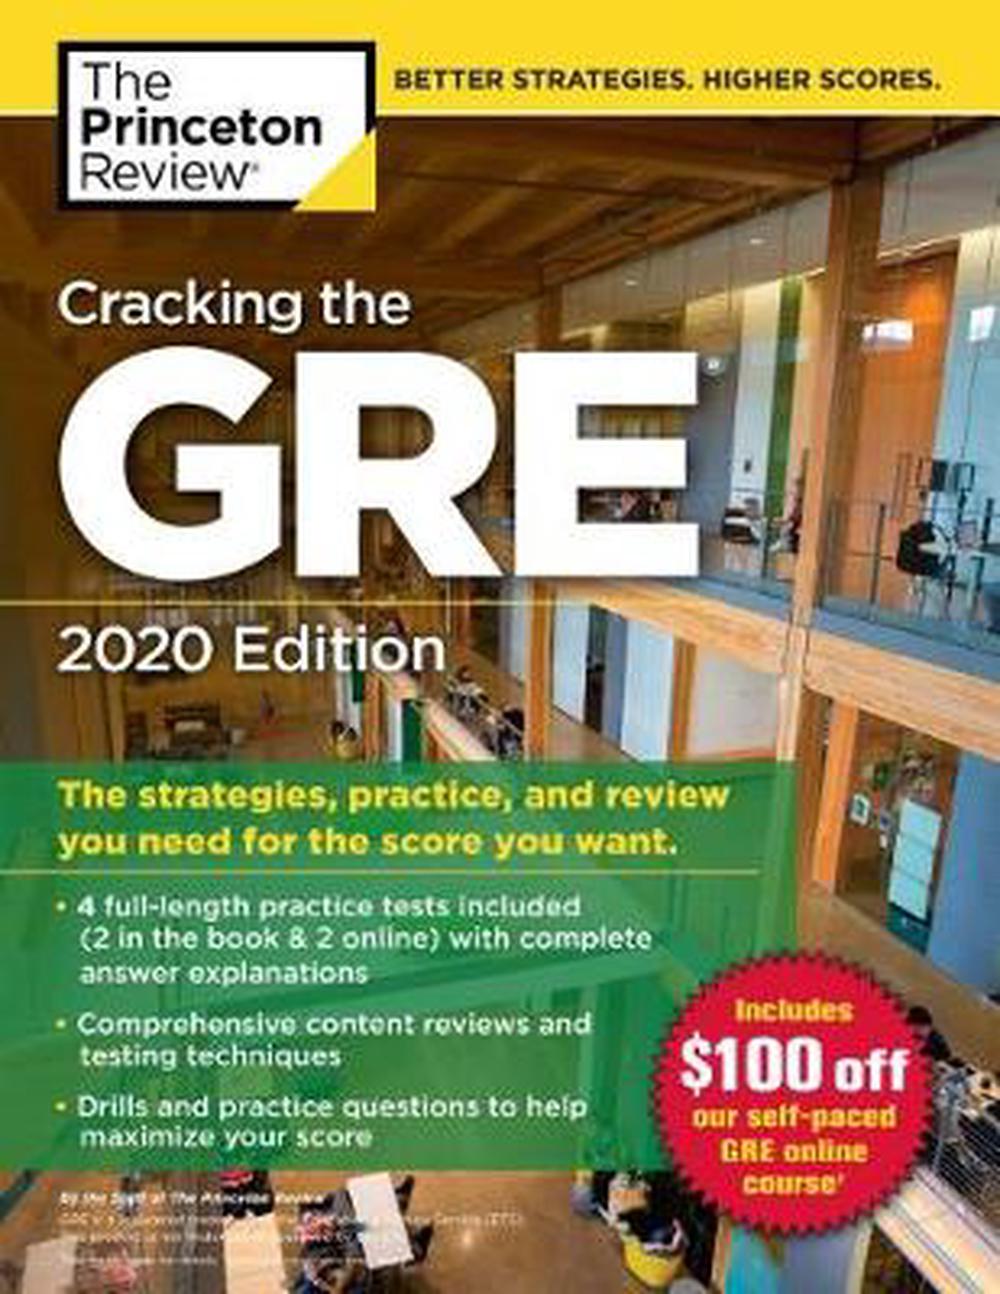 Cracking the Gre With 4 Practice Tests, 2020 Edition by Princeton